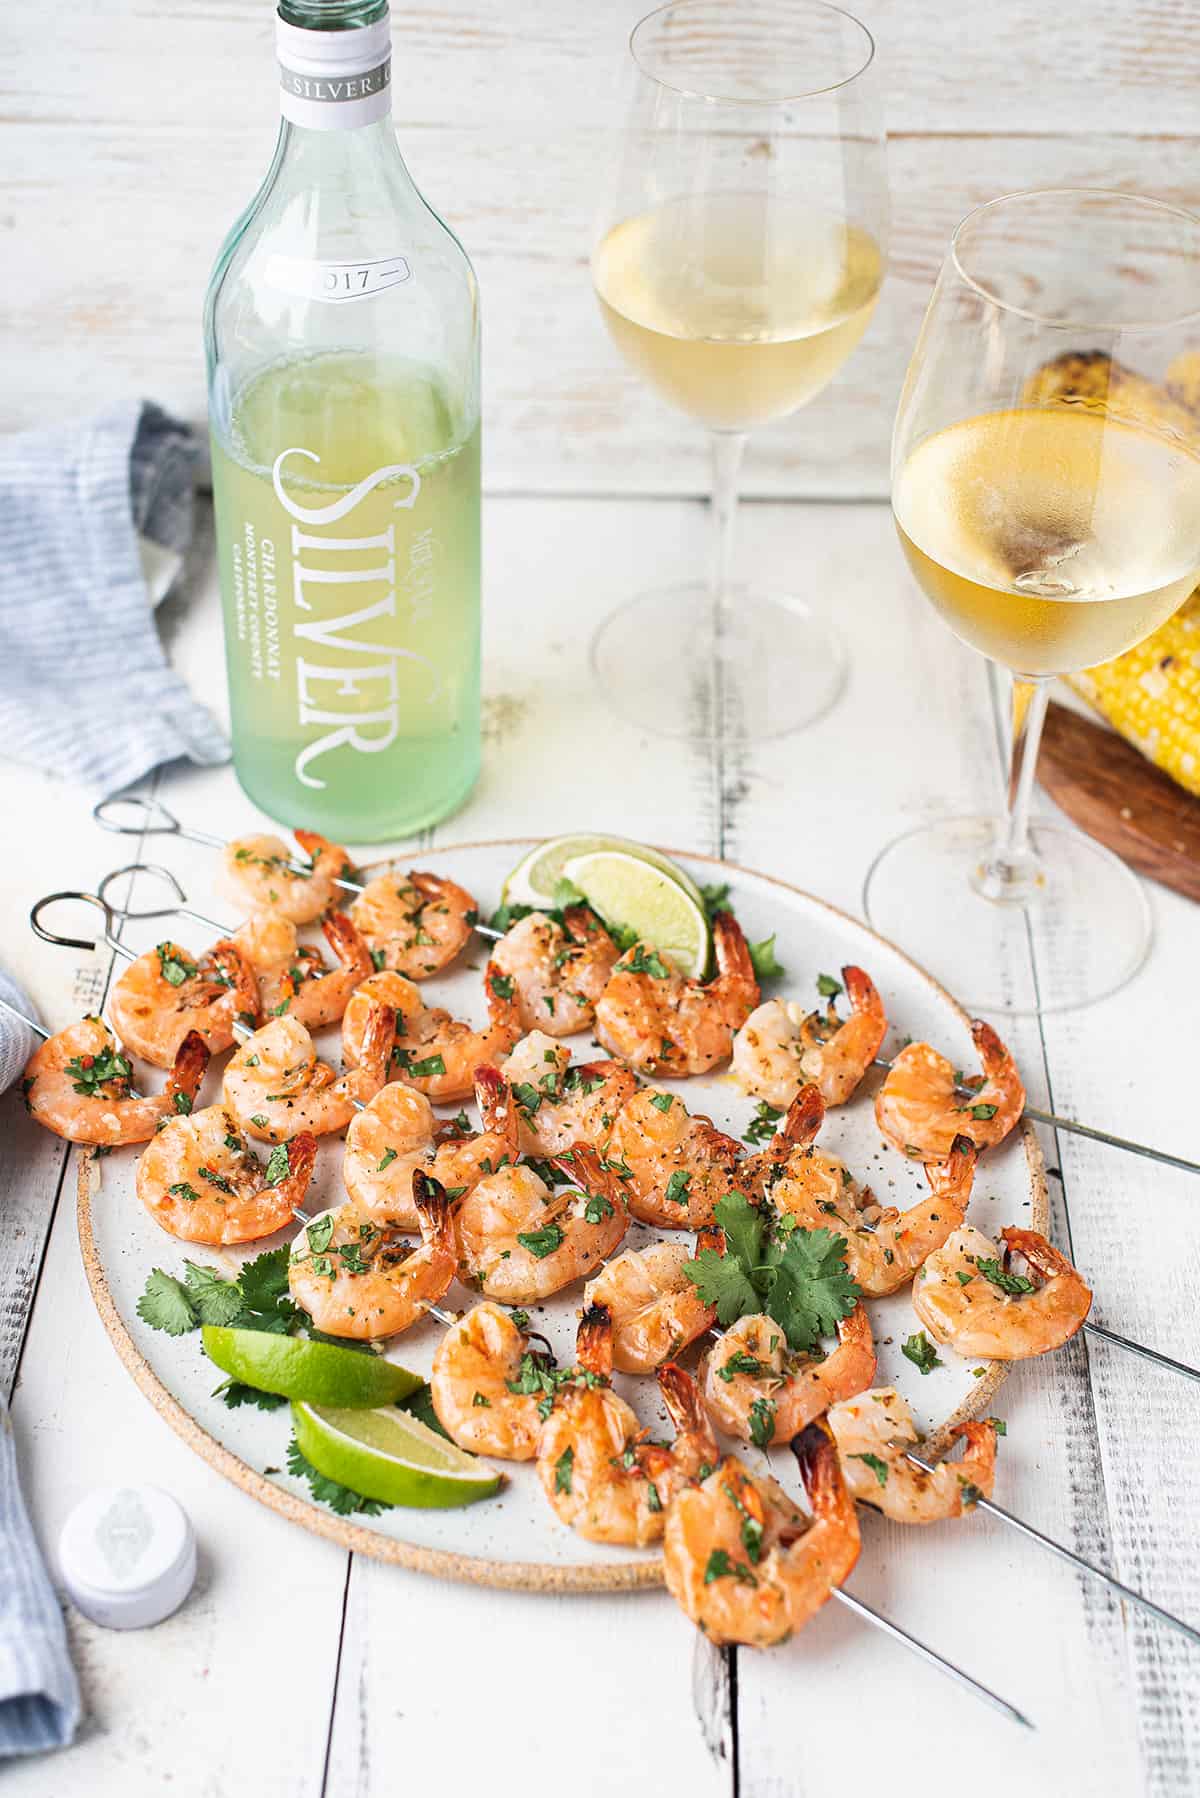 shrimp skewers on white plate with glasses & bottle of white wine